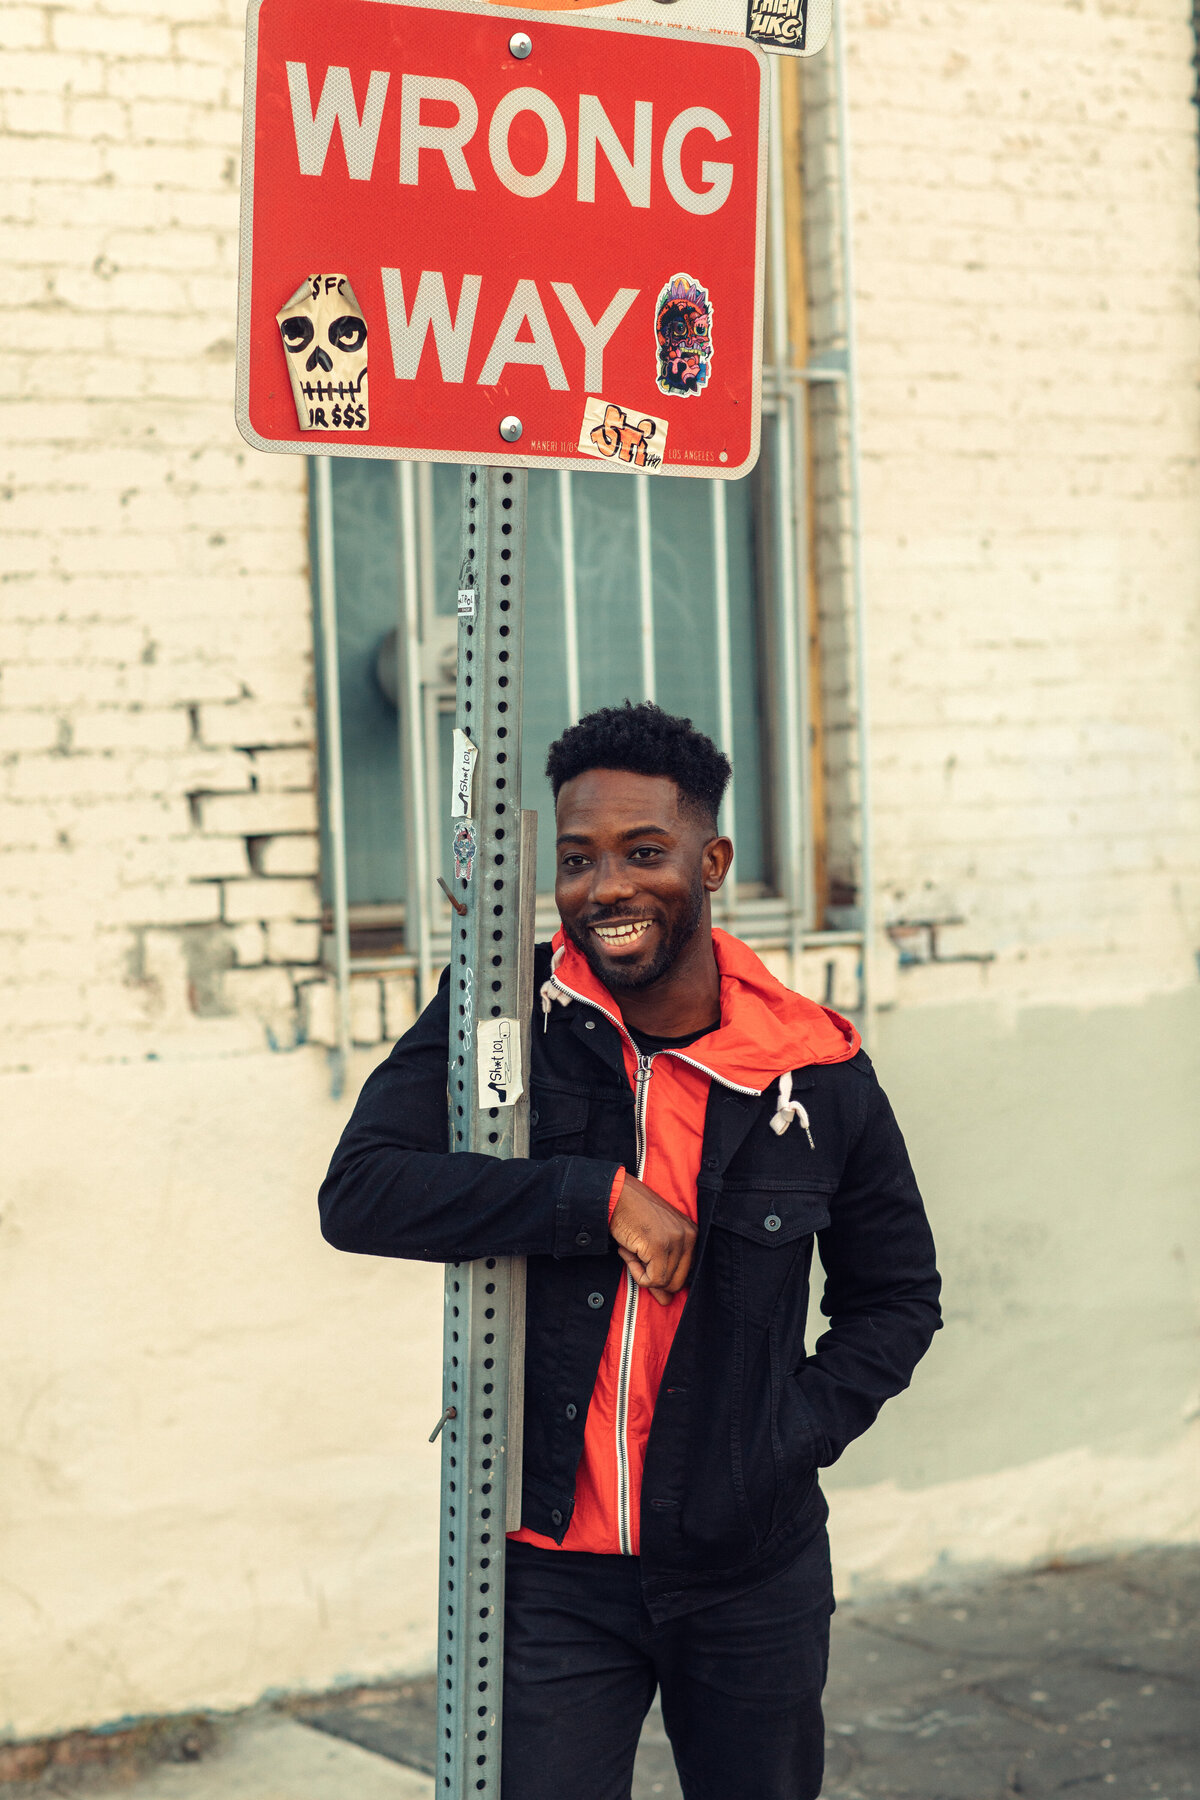 Portrait Photo Of Young Black Man Hugging a Road Signage Los Angeles